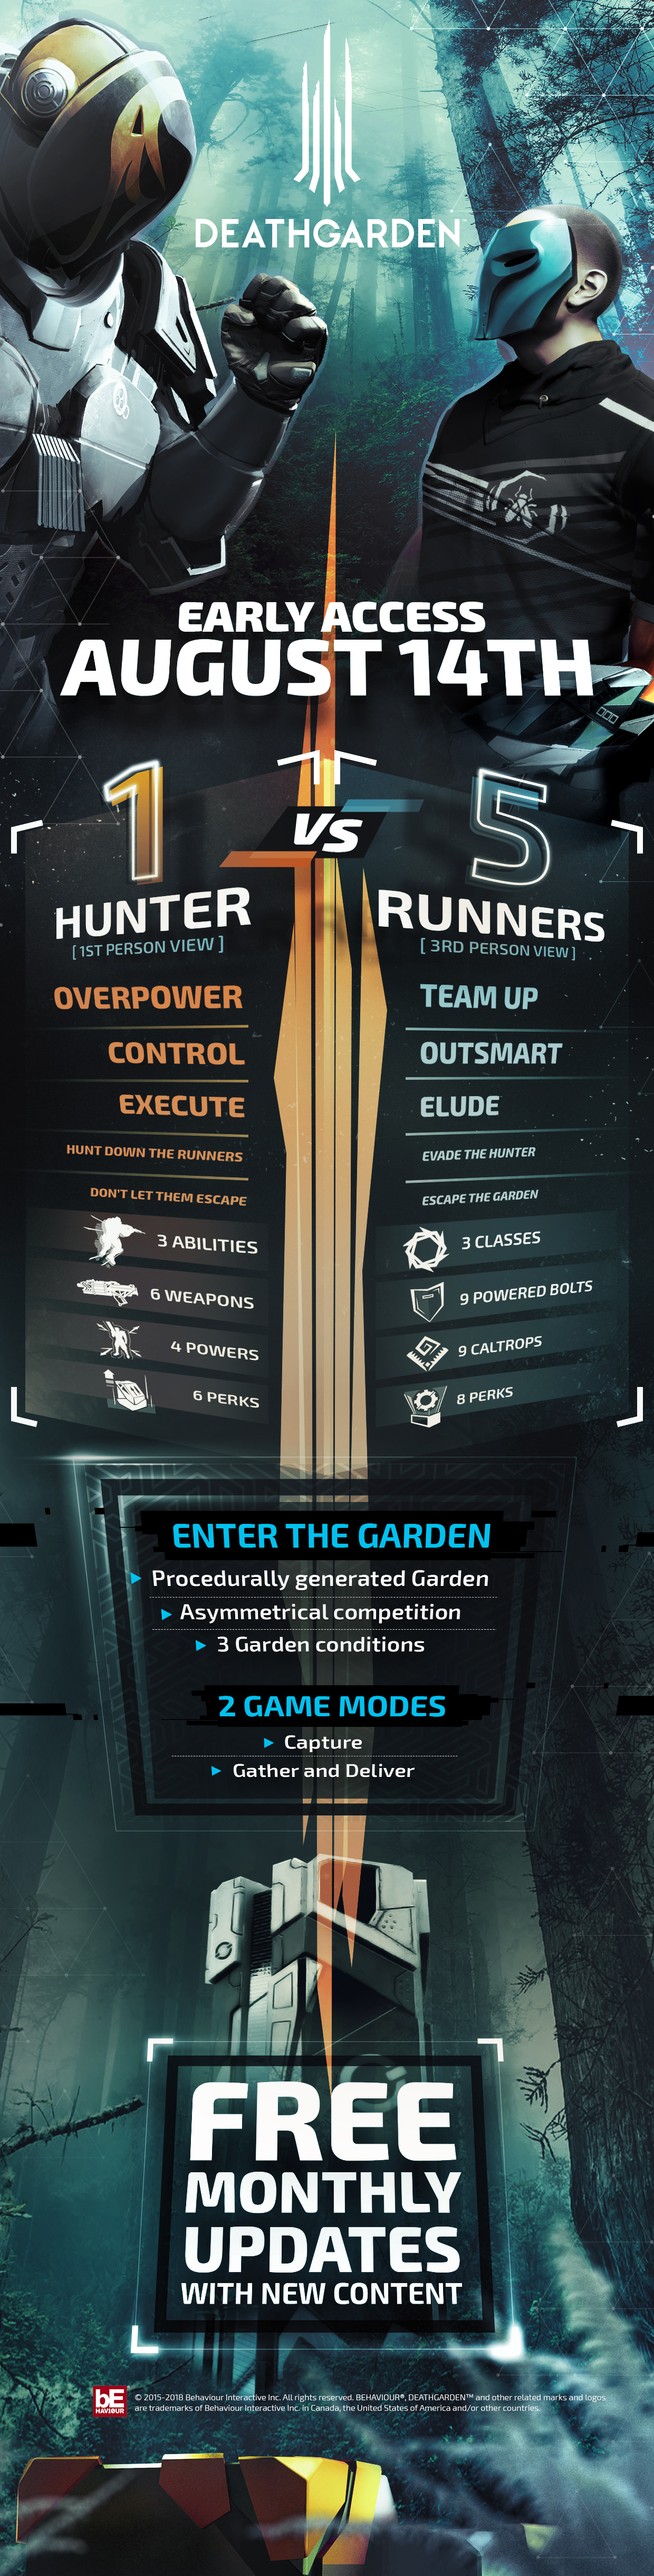 Deathgarden_infographic_EARLY_ACCESS_Aug2018